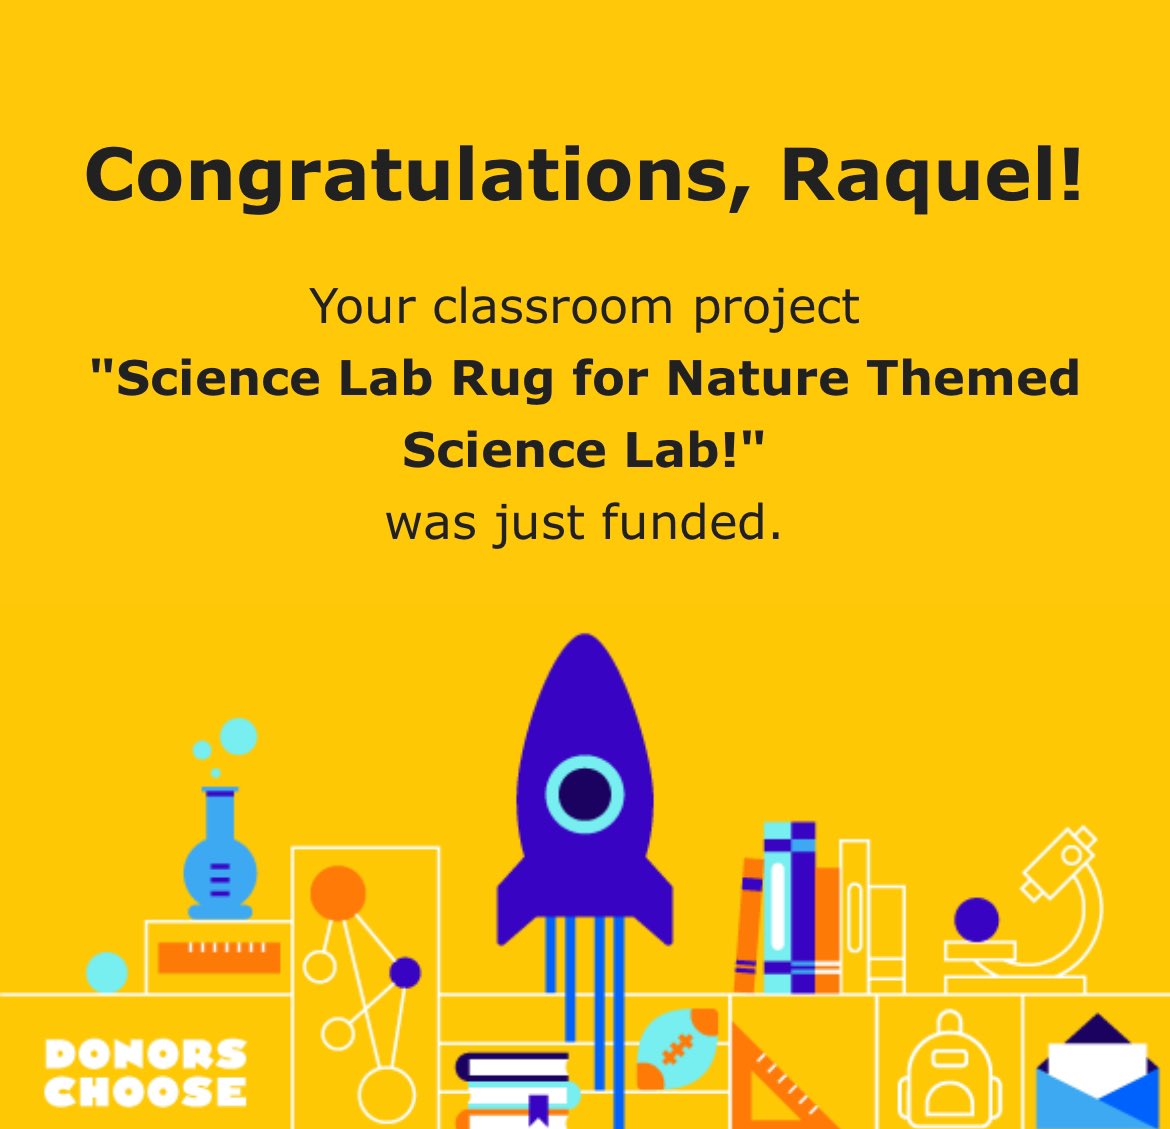 Thanks @ReesStars and @AliefScience for your support! This rug will be a great addition to our Science Lab! 🧪🥼 @MireyaFromTX @KathyCherryAP